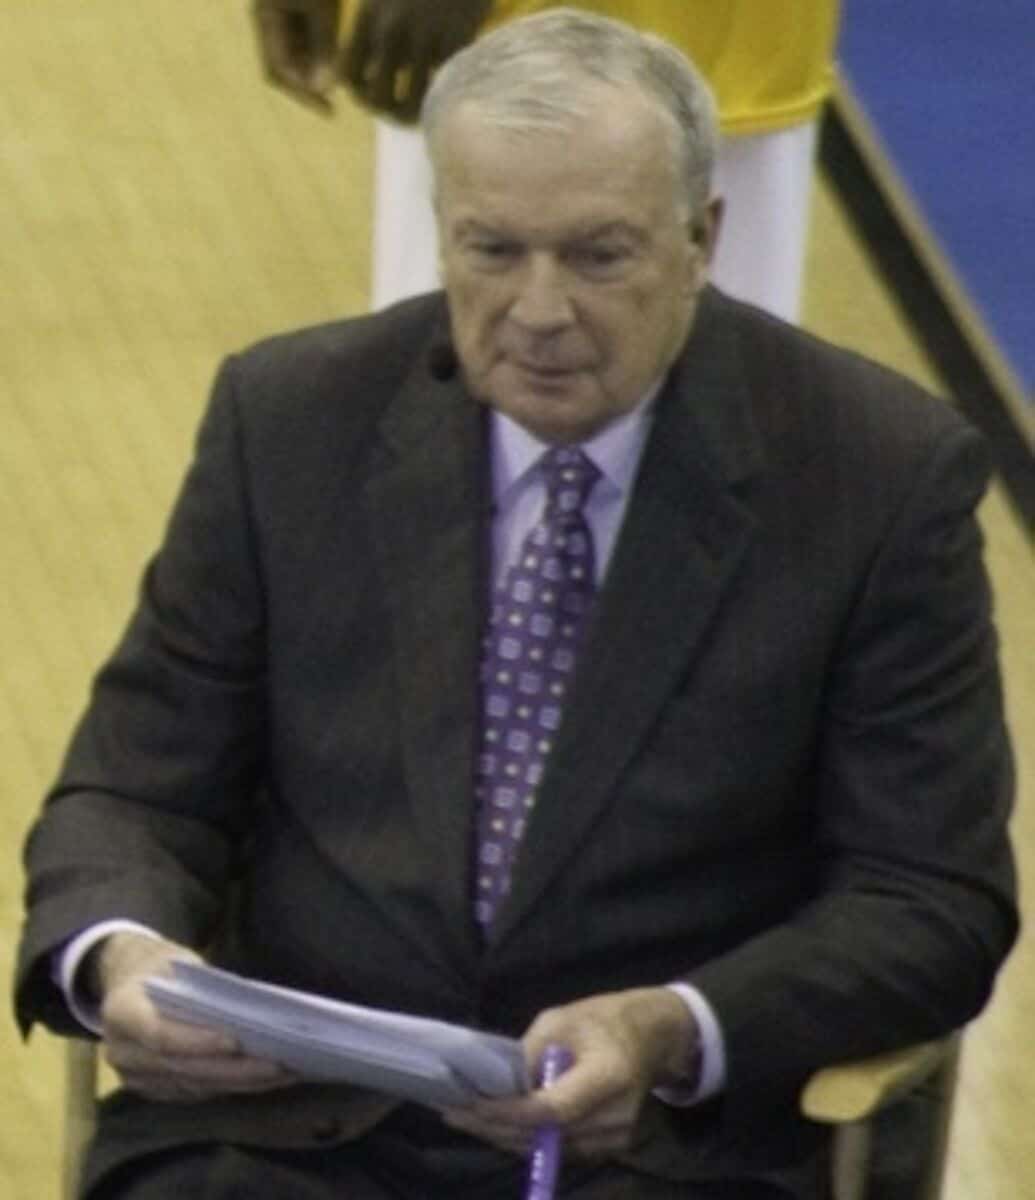 Digger Phelps - Famous Basketball Coach